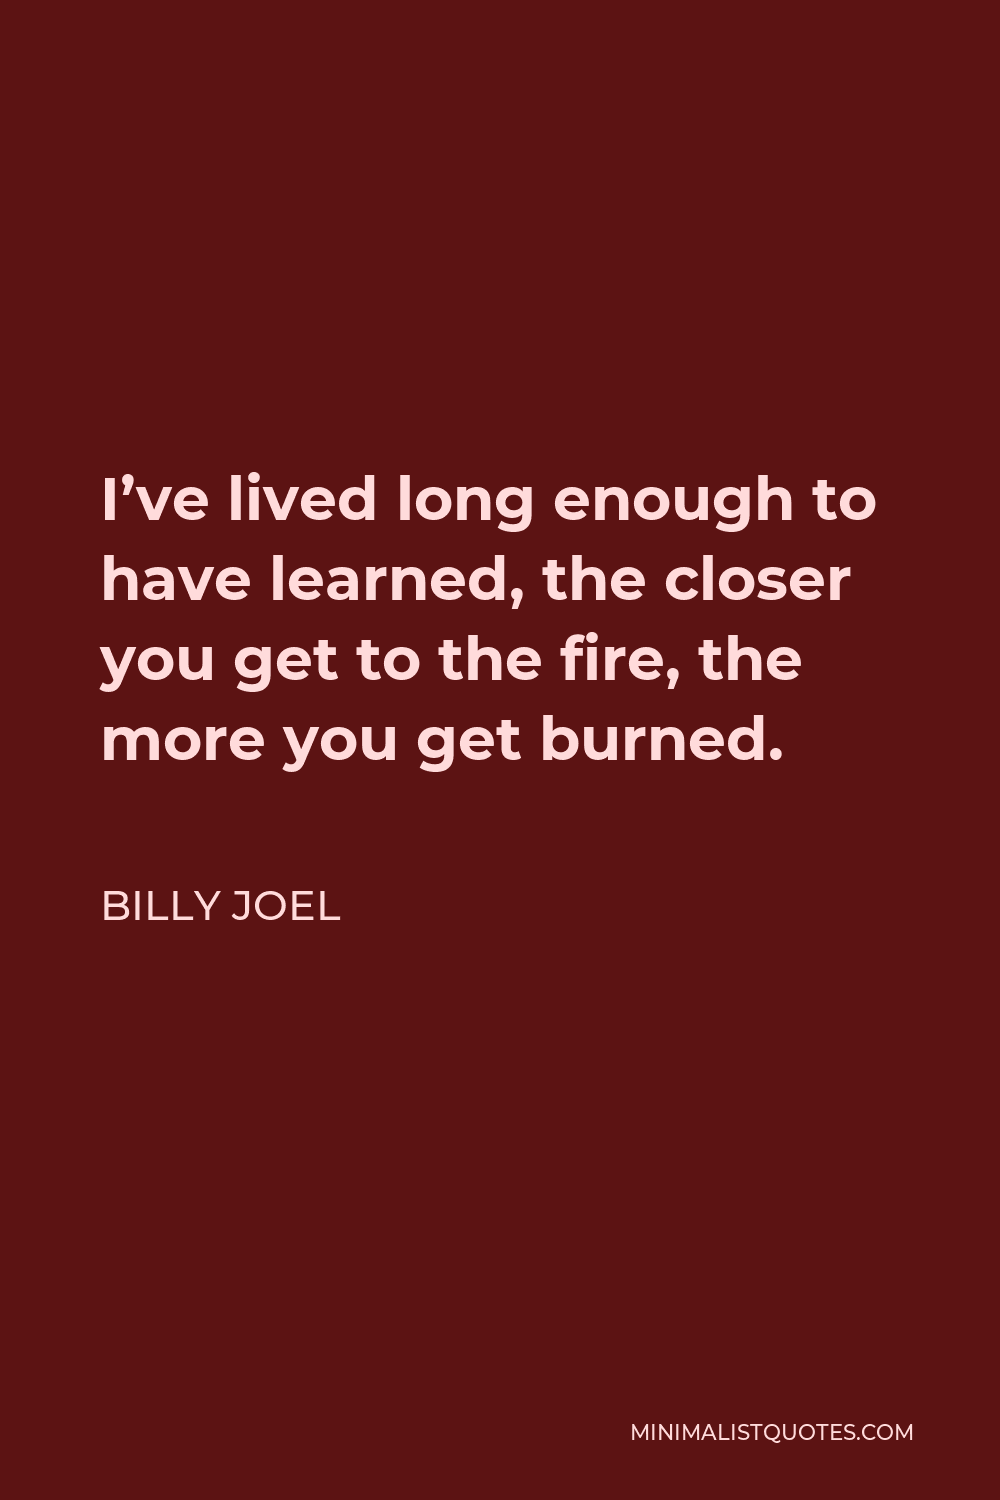 Billy Joel Quote - I’ve lived long enough to have learned, the closer you get to the fire, the more you get burned.